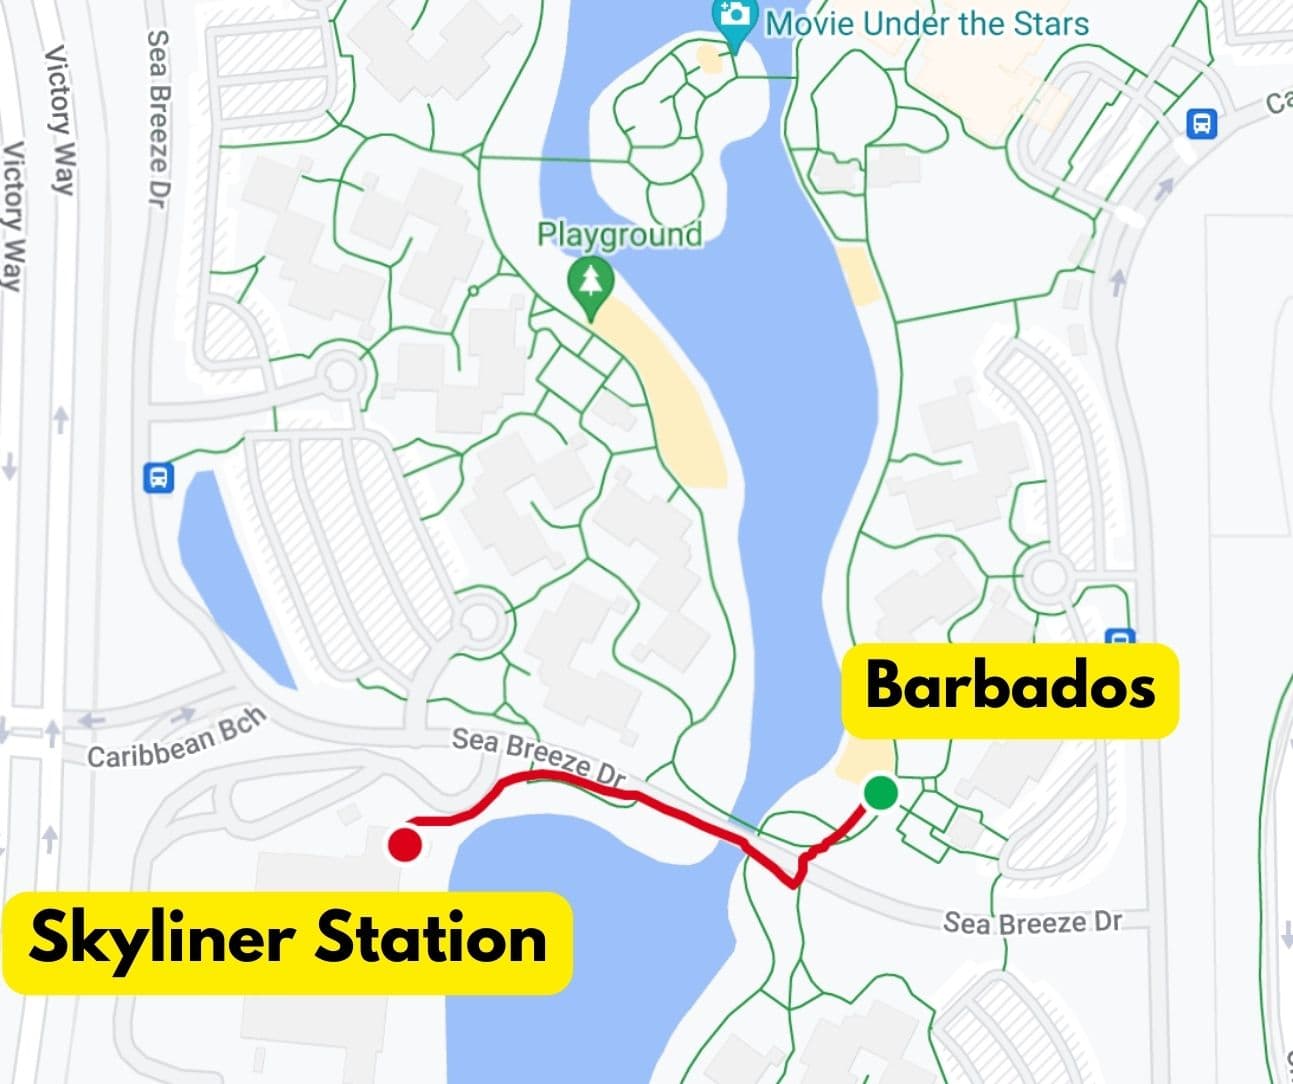 Walking Distance from Barbados to the Skyliner Station 